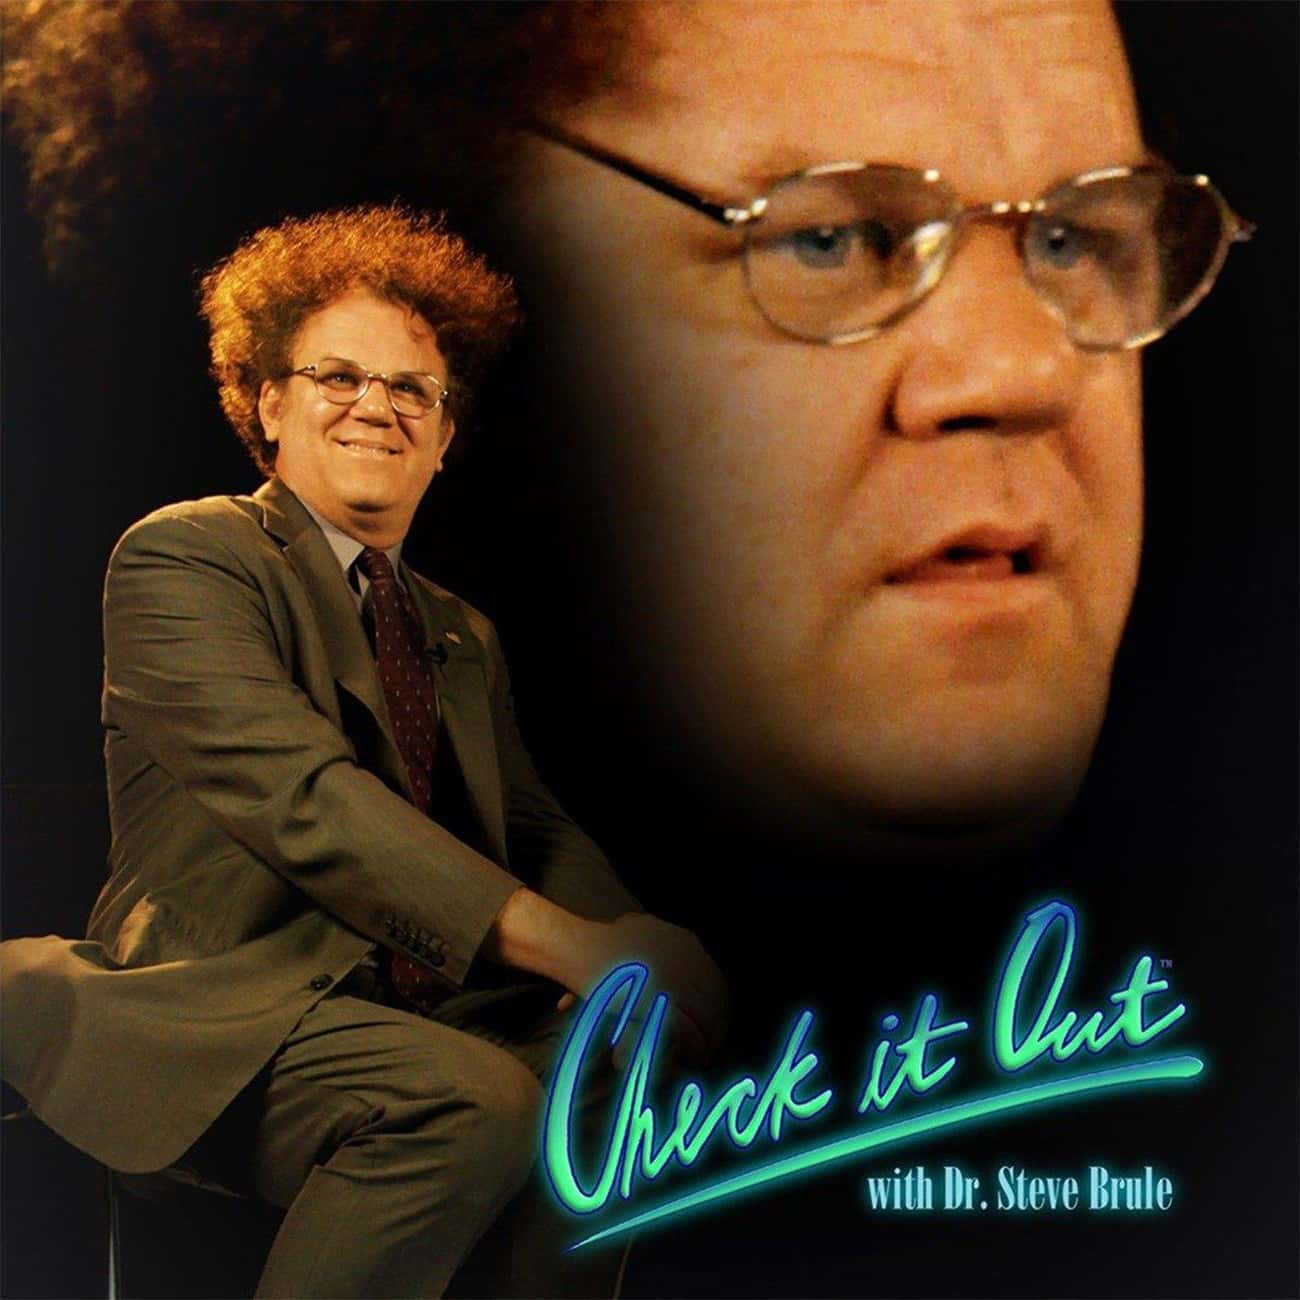 Check It Out!, with Dr. Steve Brule